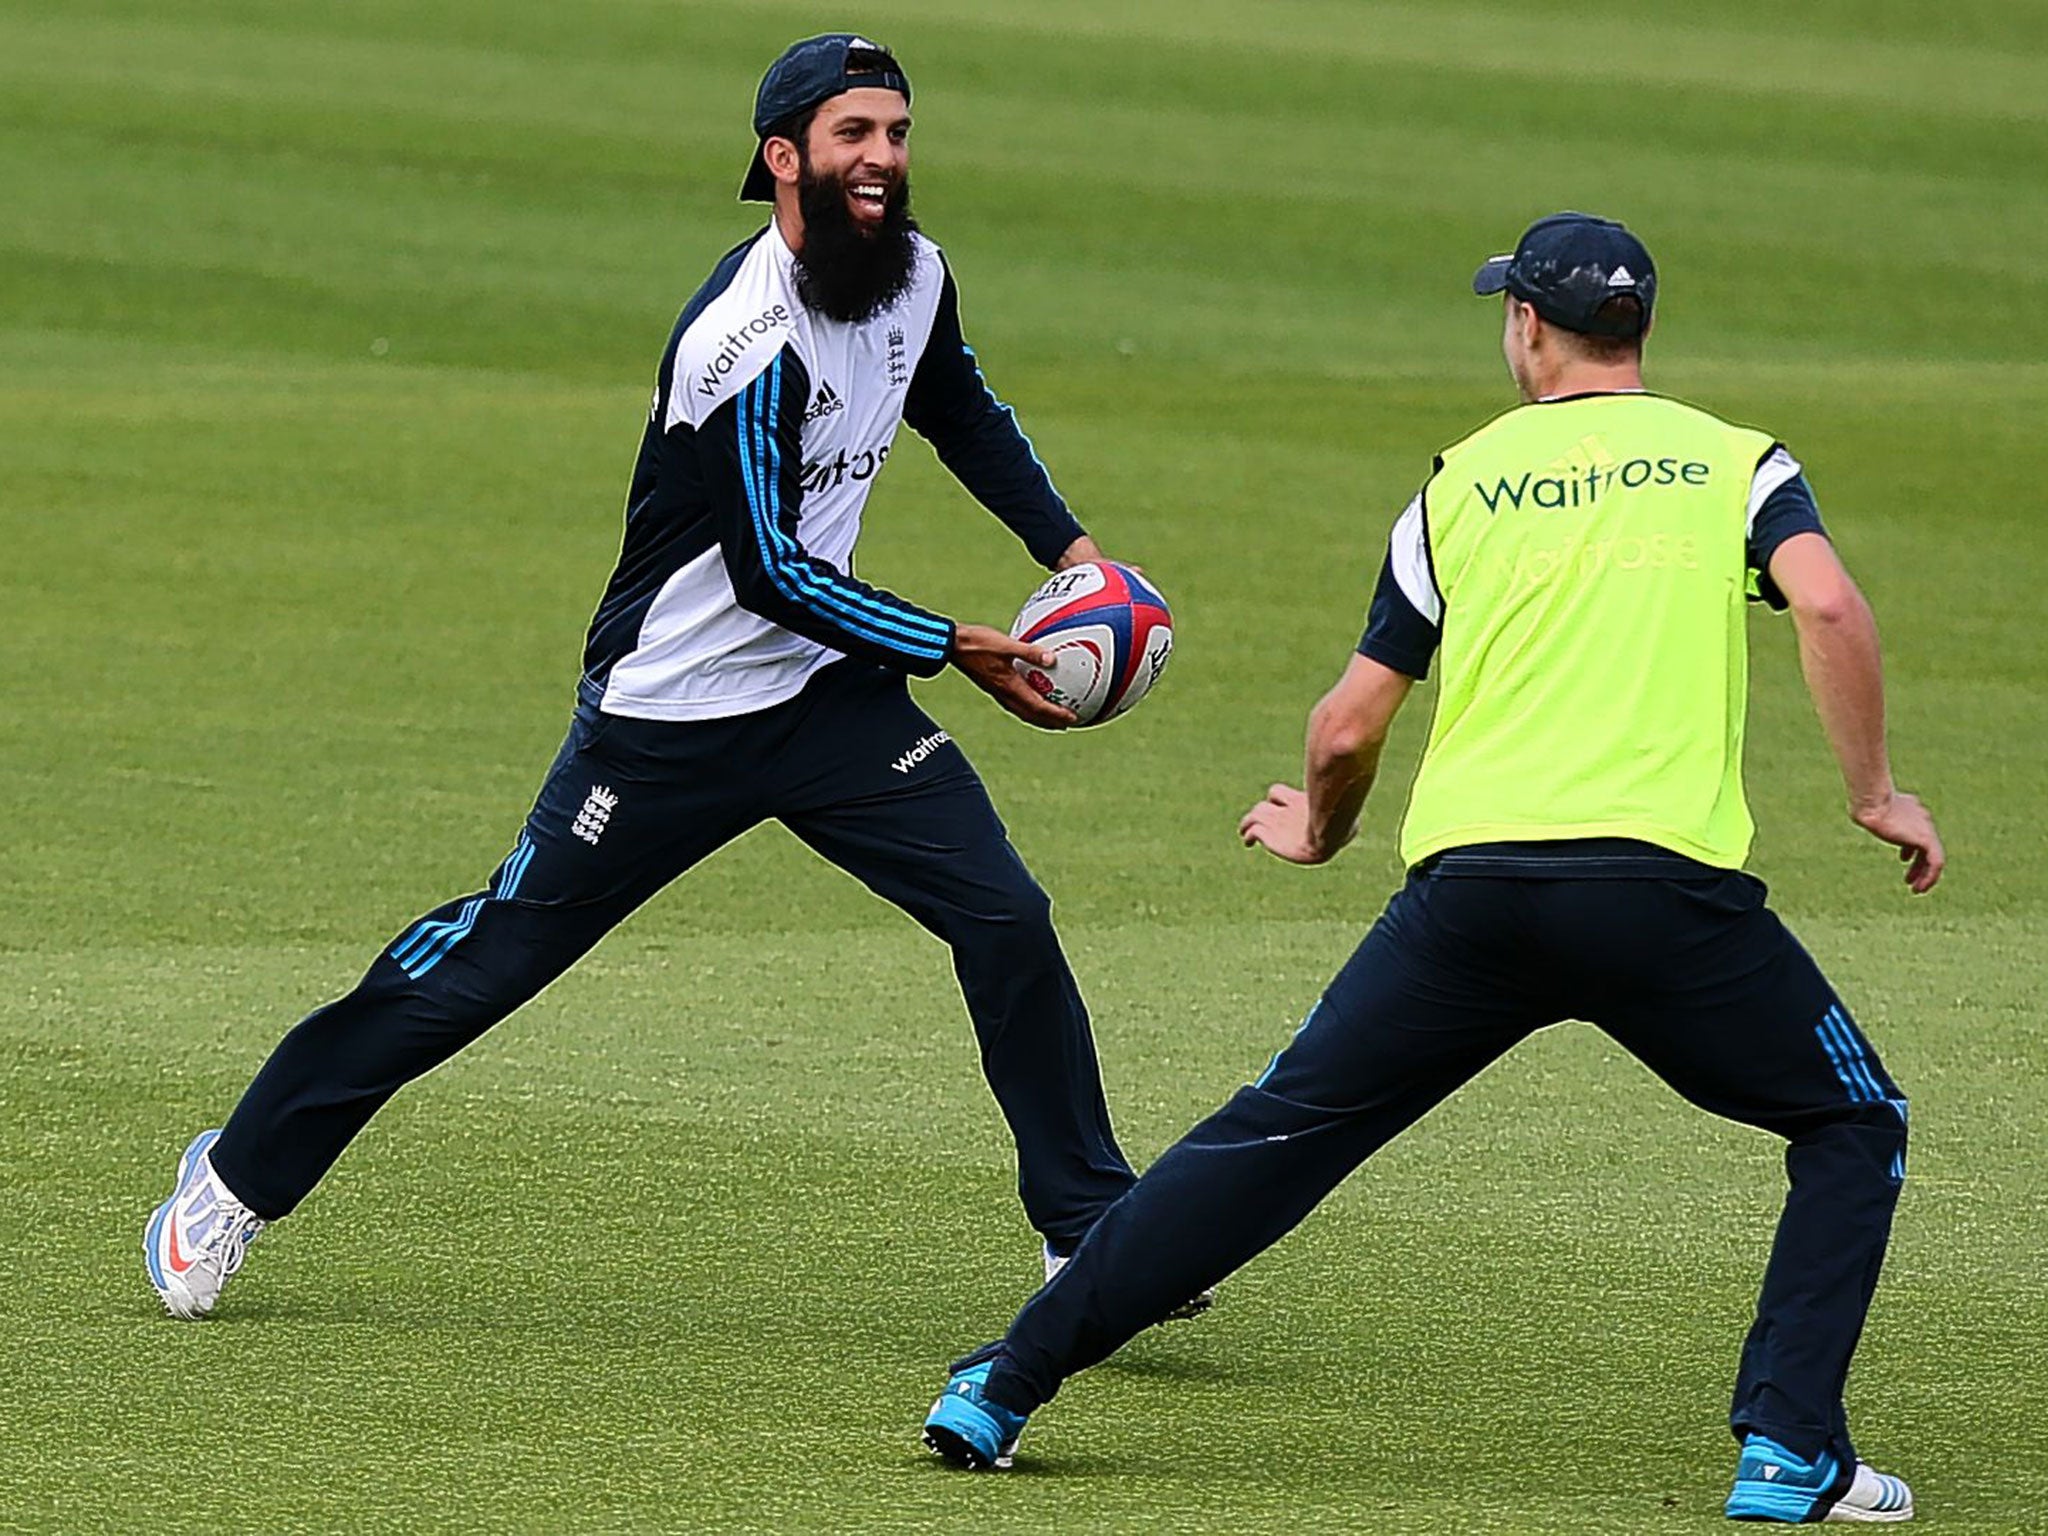 Moeen Ali shows off his rugby skills in training at The Oval on Wednesday